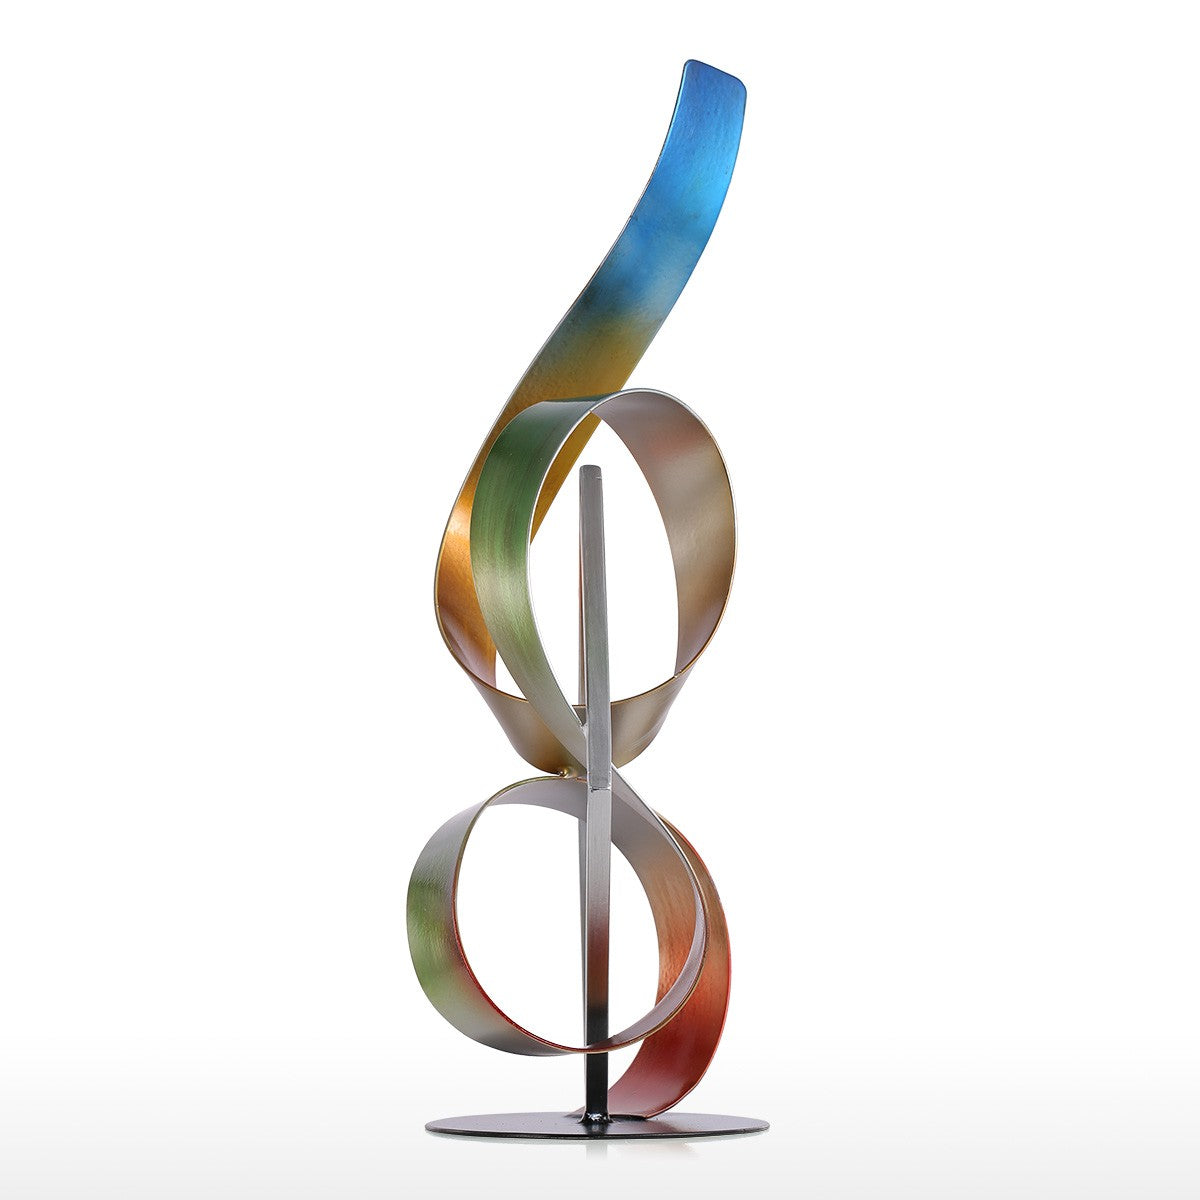 Abstract and Metal Sculpture with Sculpture for Christmas Decorations and Home Decor